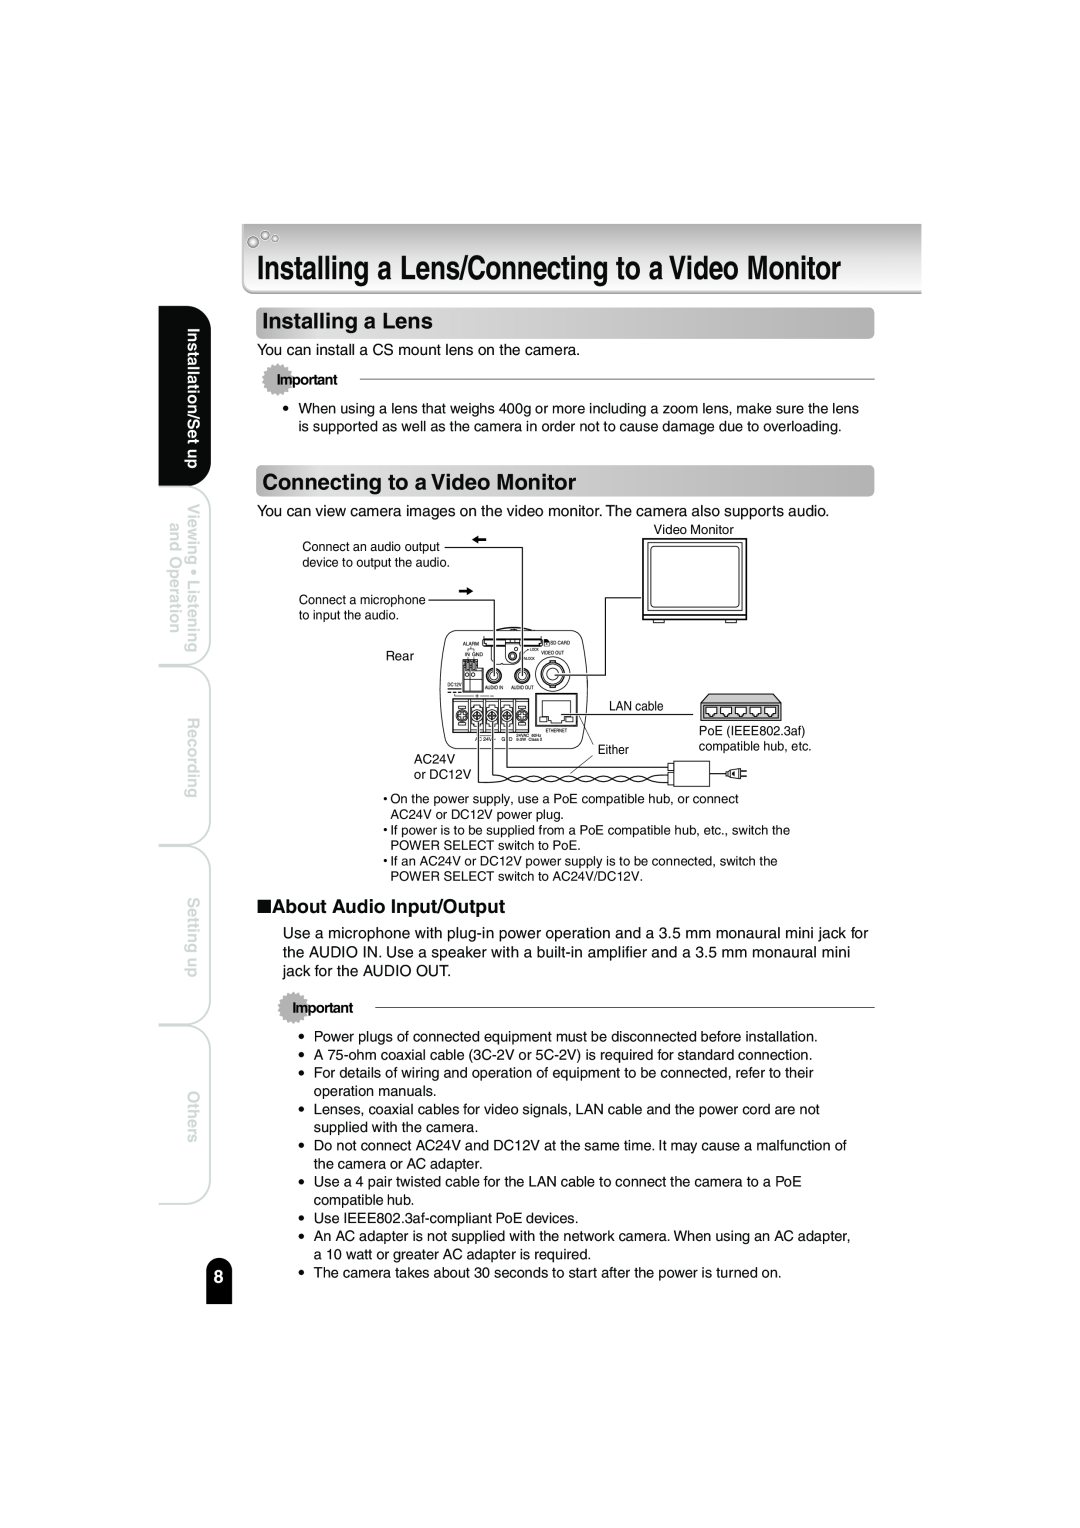 Toshiba IK-WB02A Installing a Lens/Connecting to a Video Monitor, About Audio Input/Output, Installation/Set up, Recording 